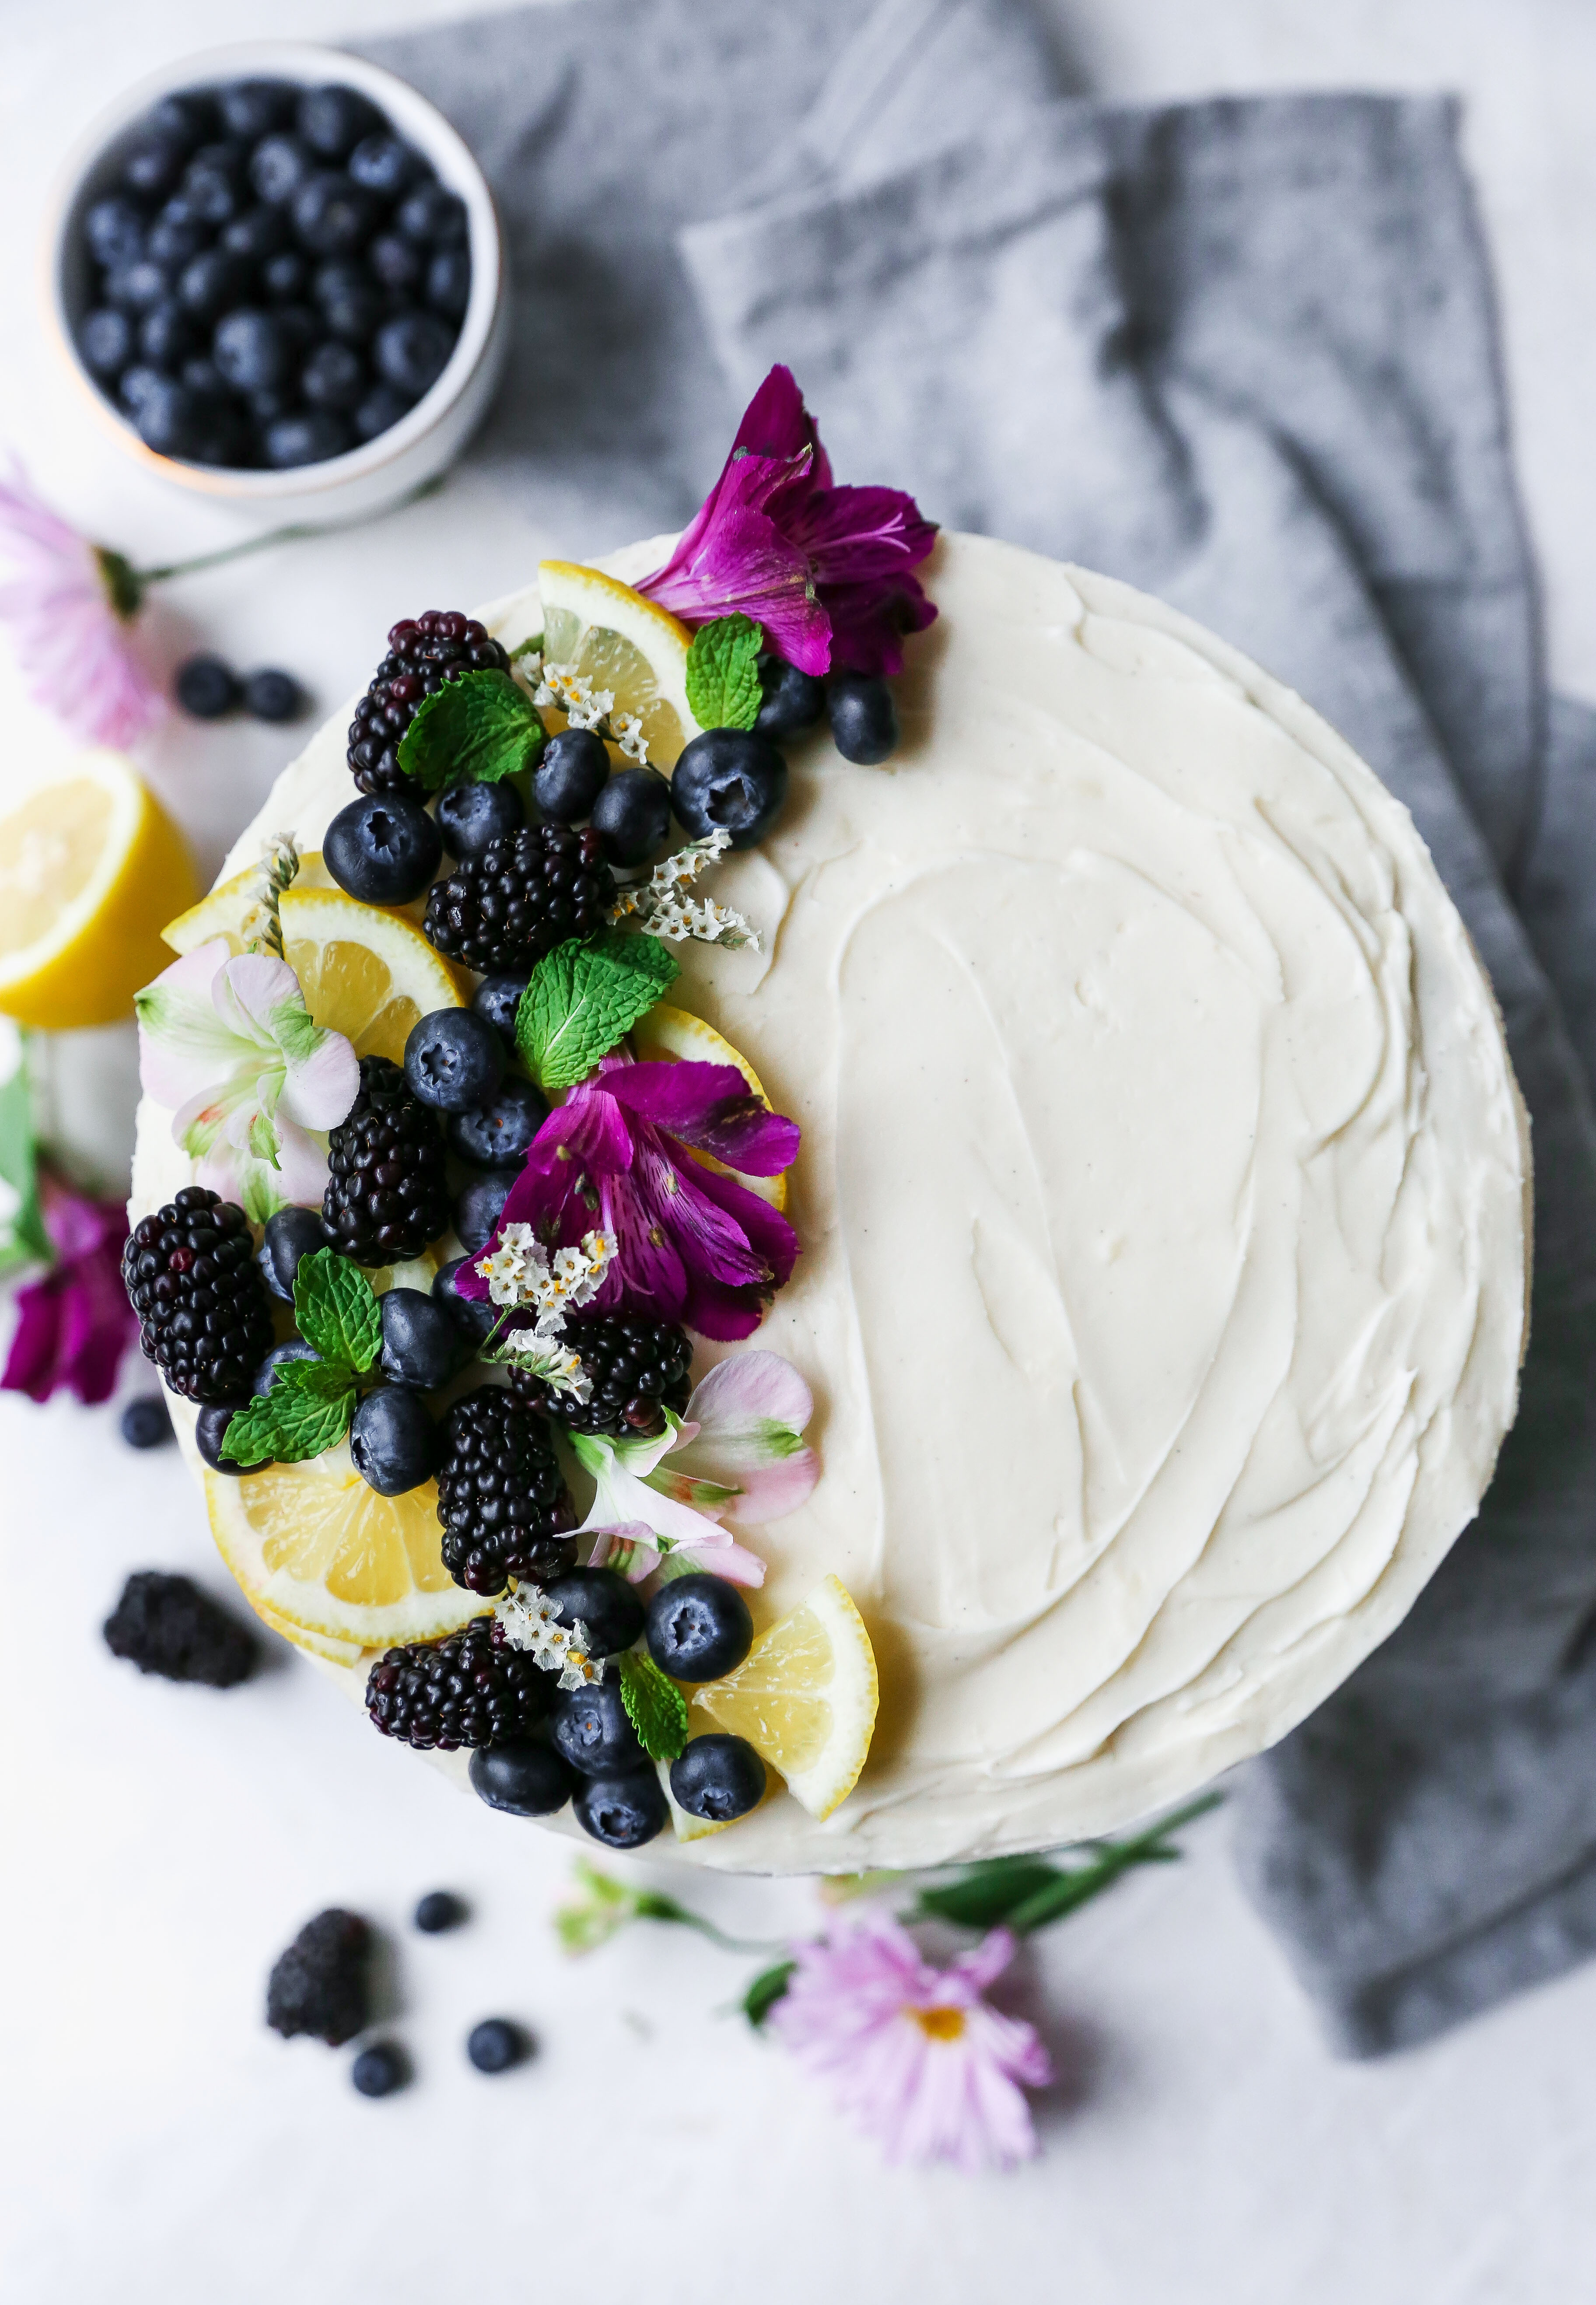 Lemon Blueberry Layer Cake with Cream Cheese Frosting - Yes to Yolks